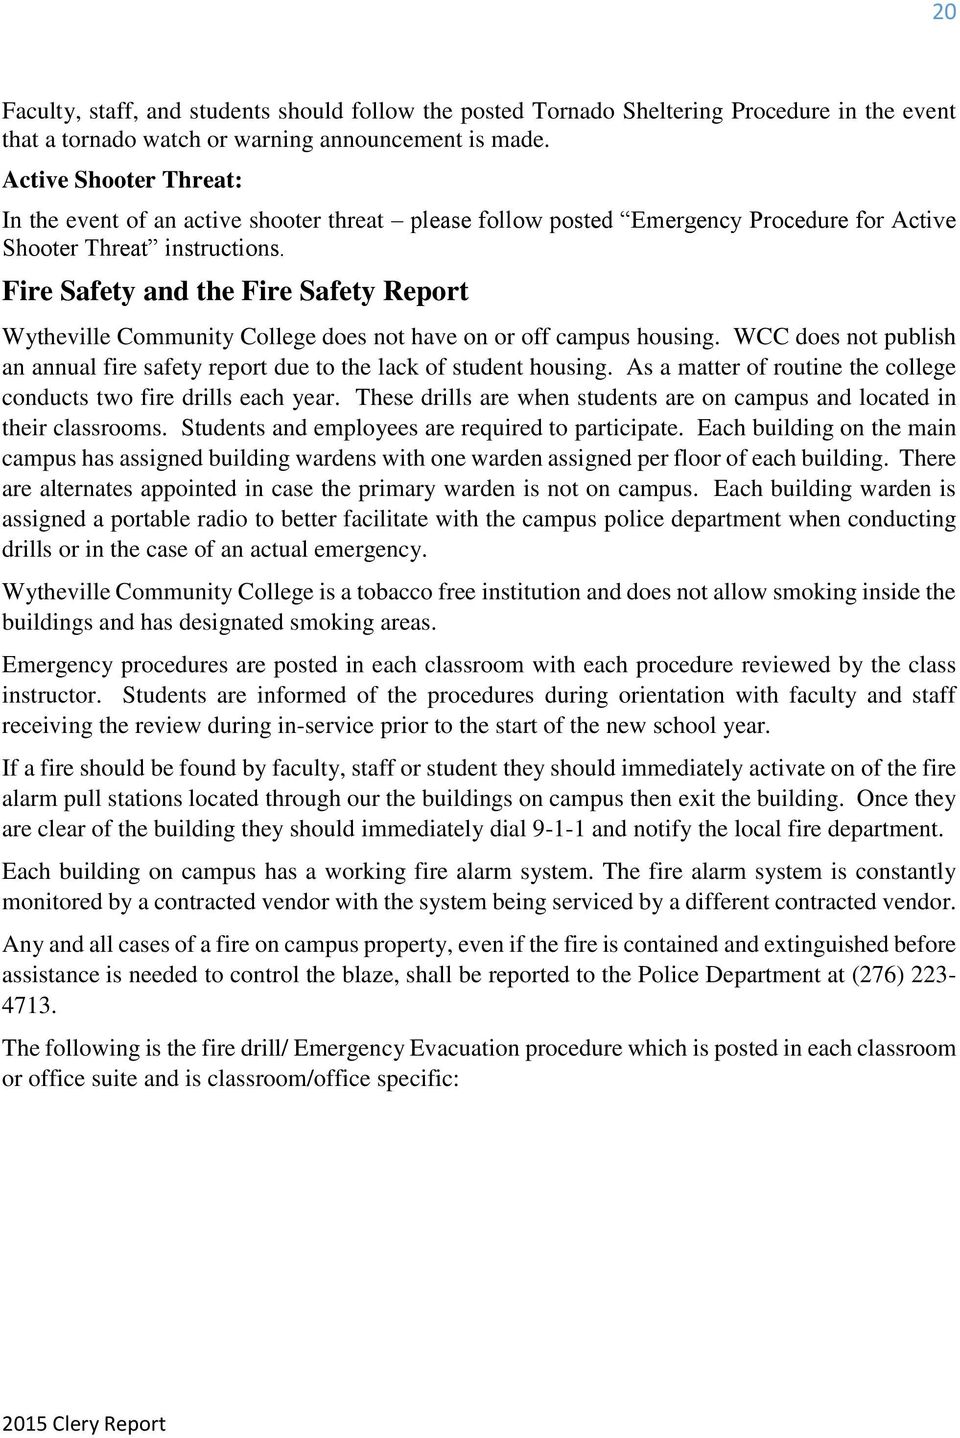 Fire Safety and the Fire Safety Report Wytheville Community College does not have on or off campus housing. WCC does not publish an annual fire safety report due to the lack of student housing.